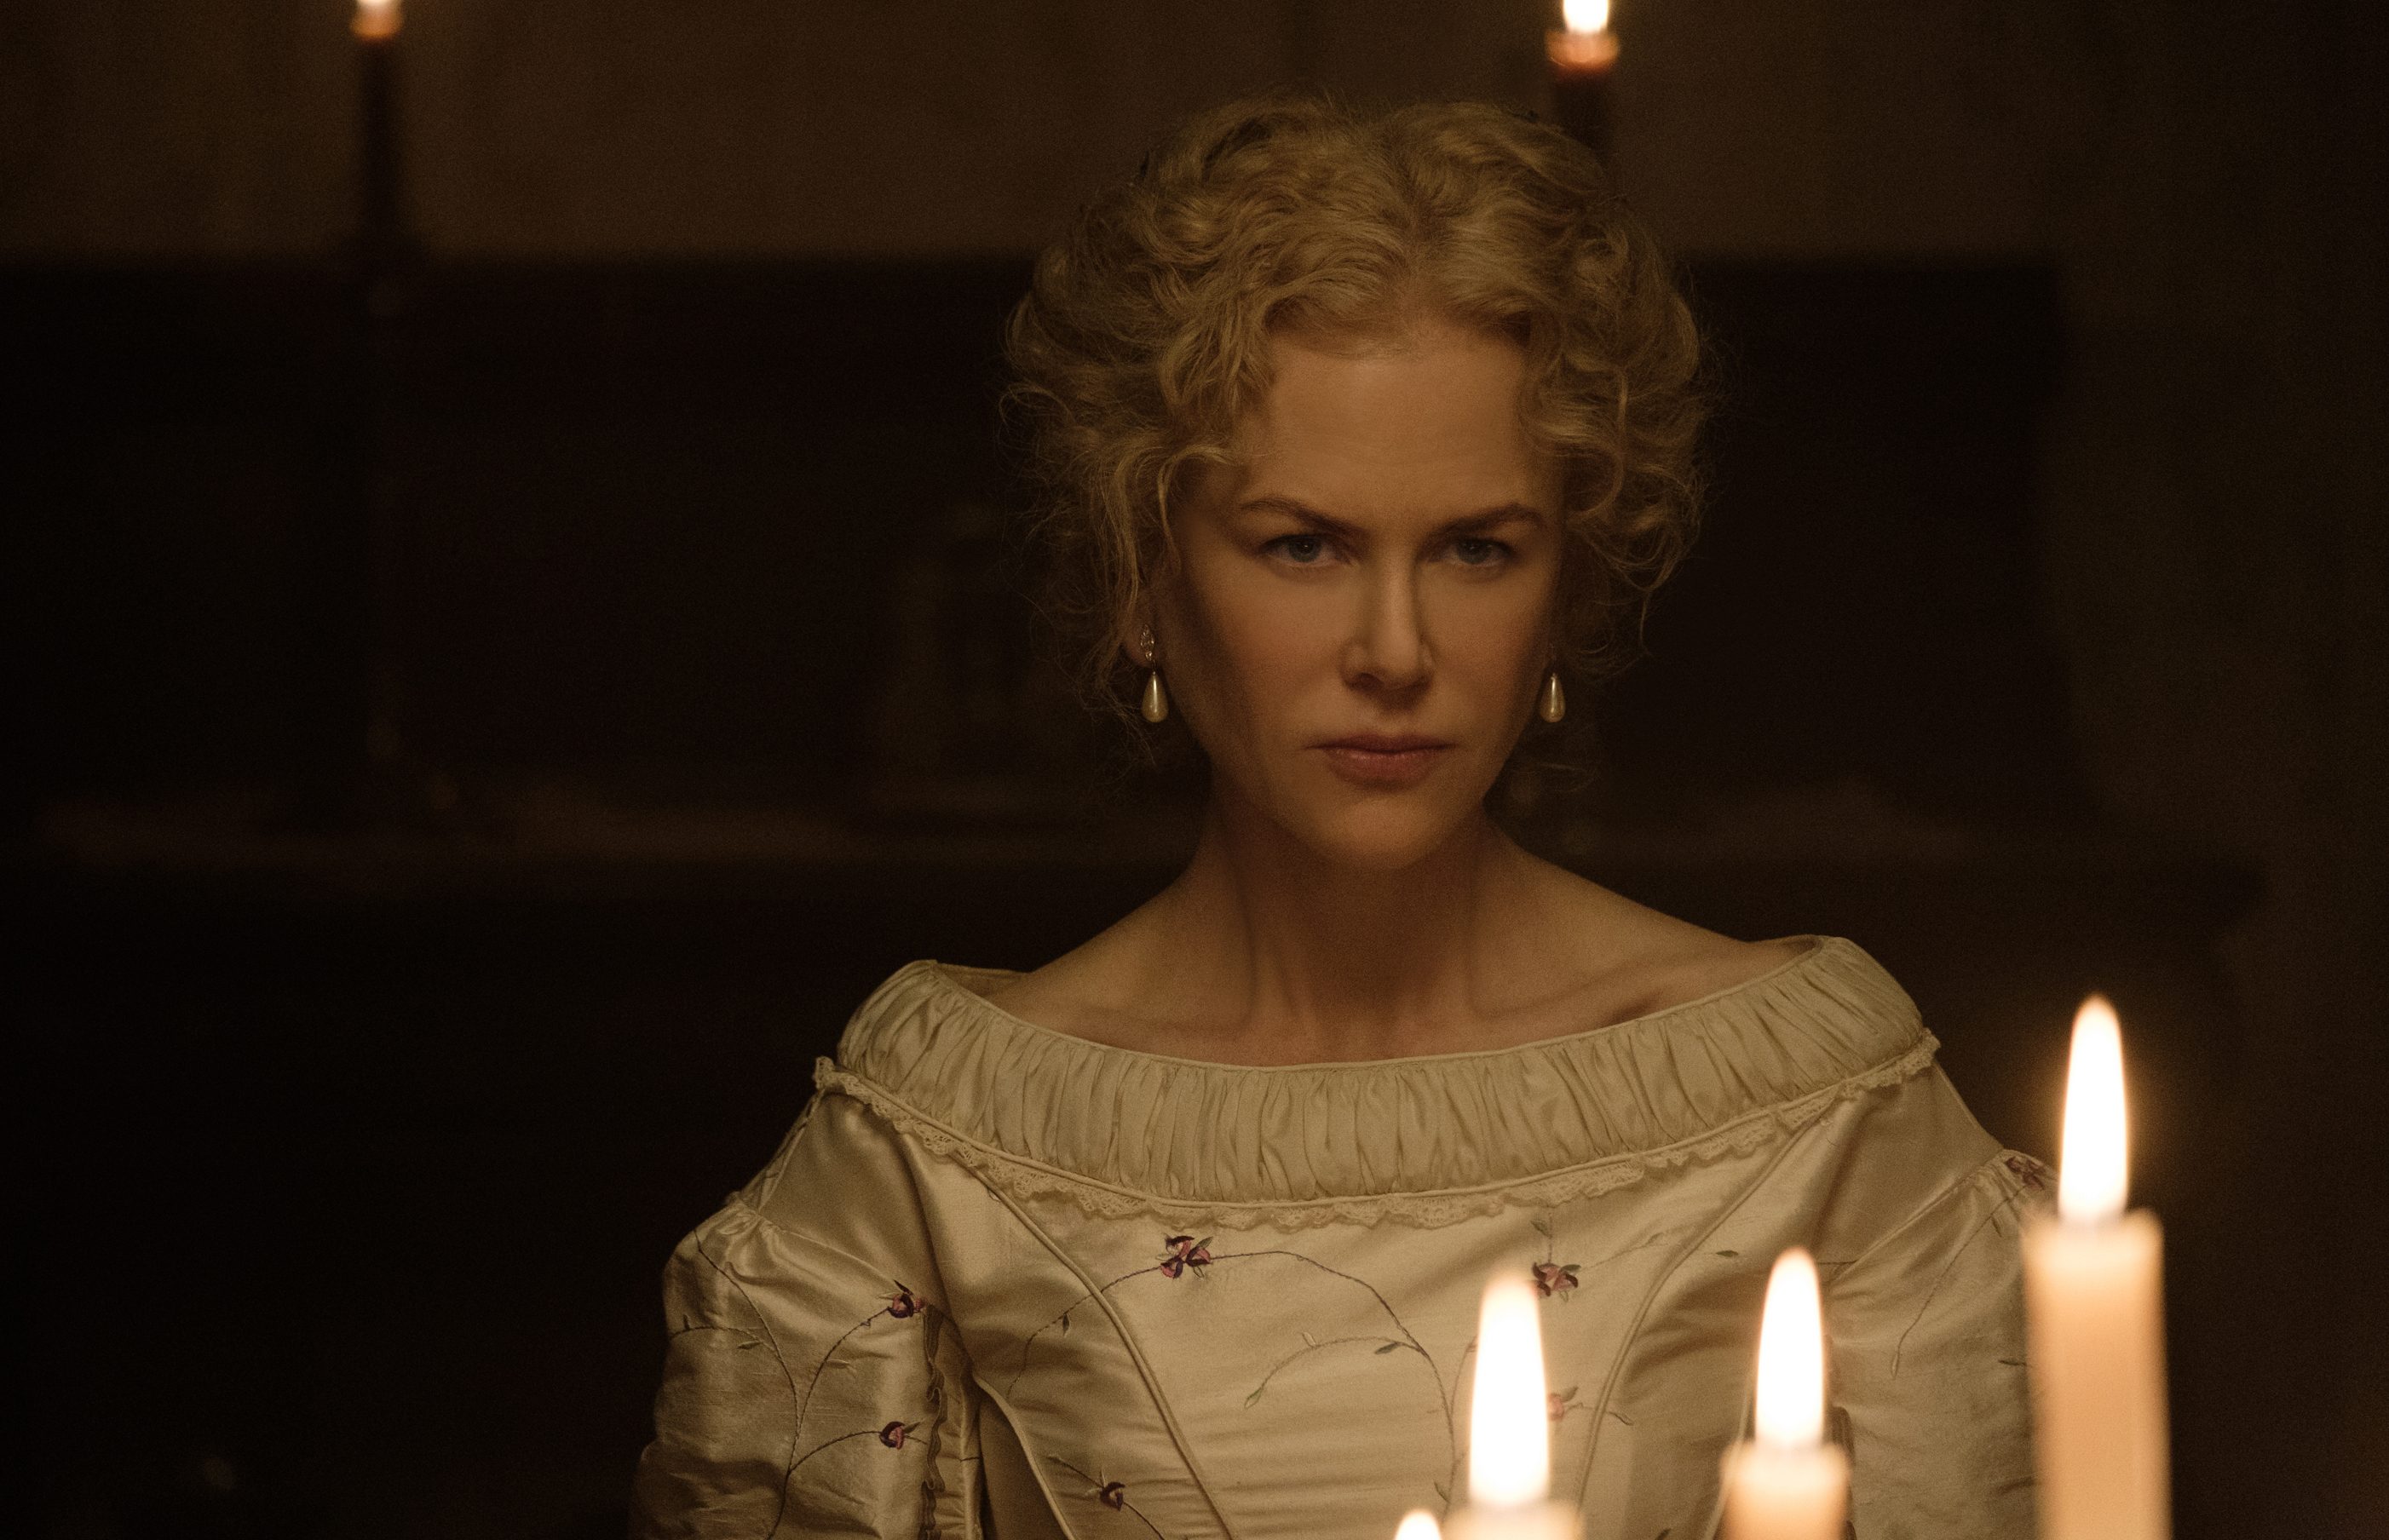 Film review: Nicole Kidman dazzles in The Beguiled